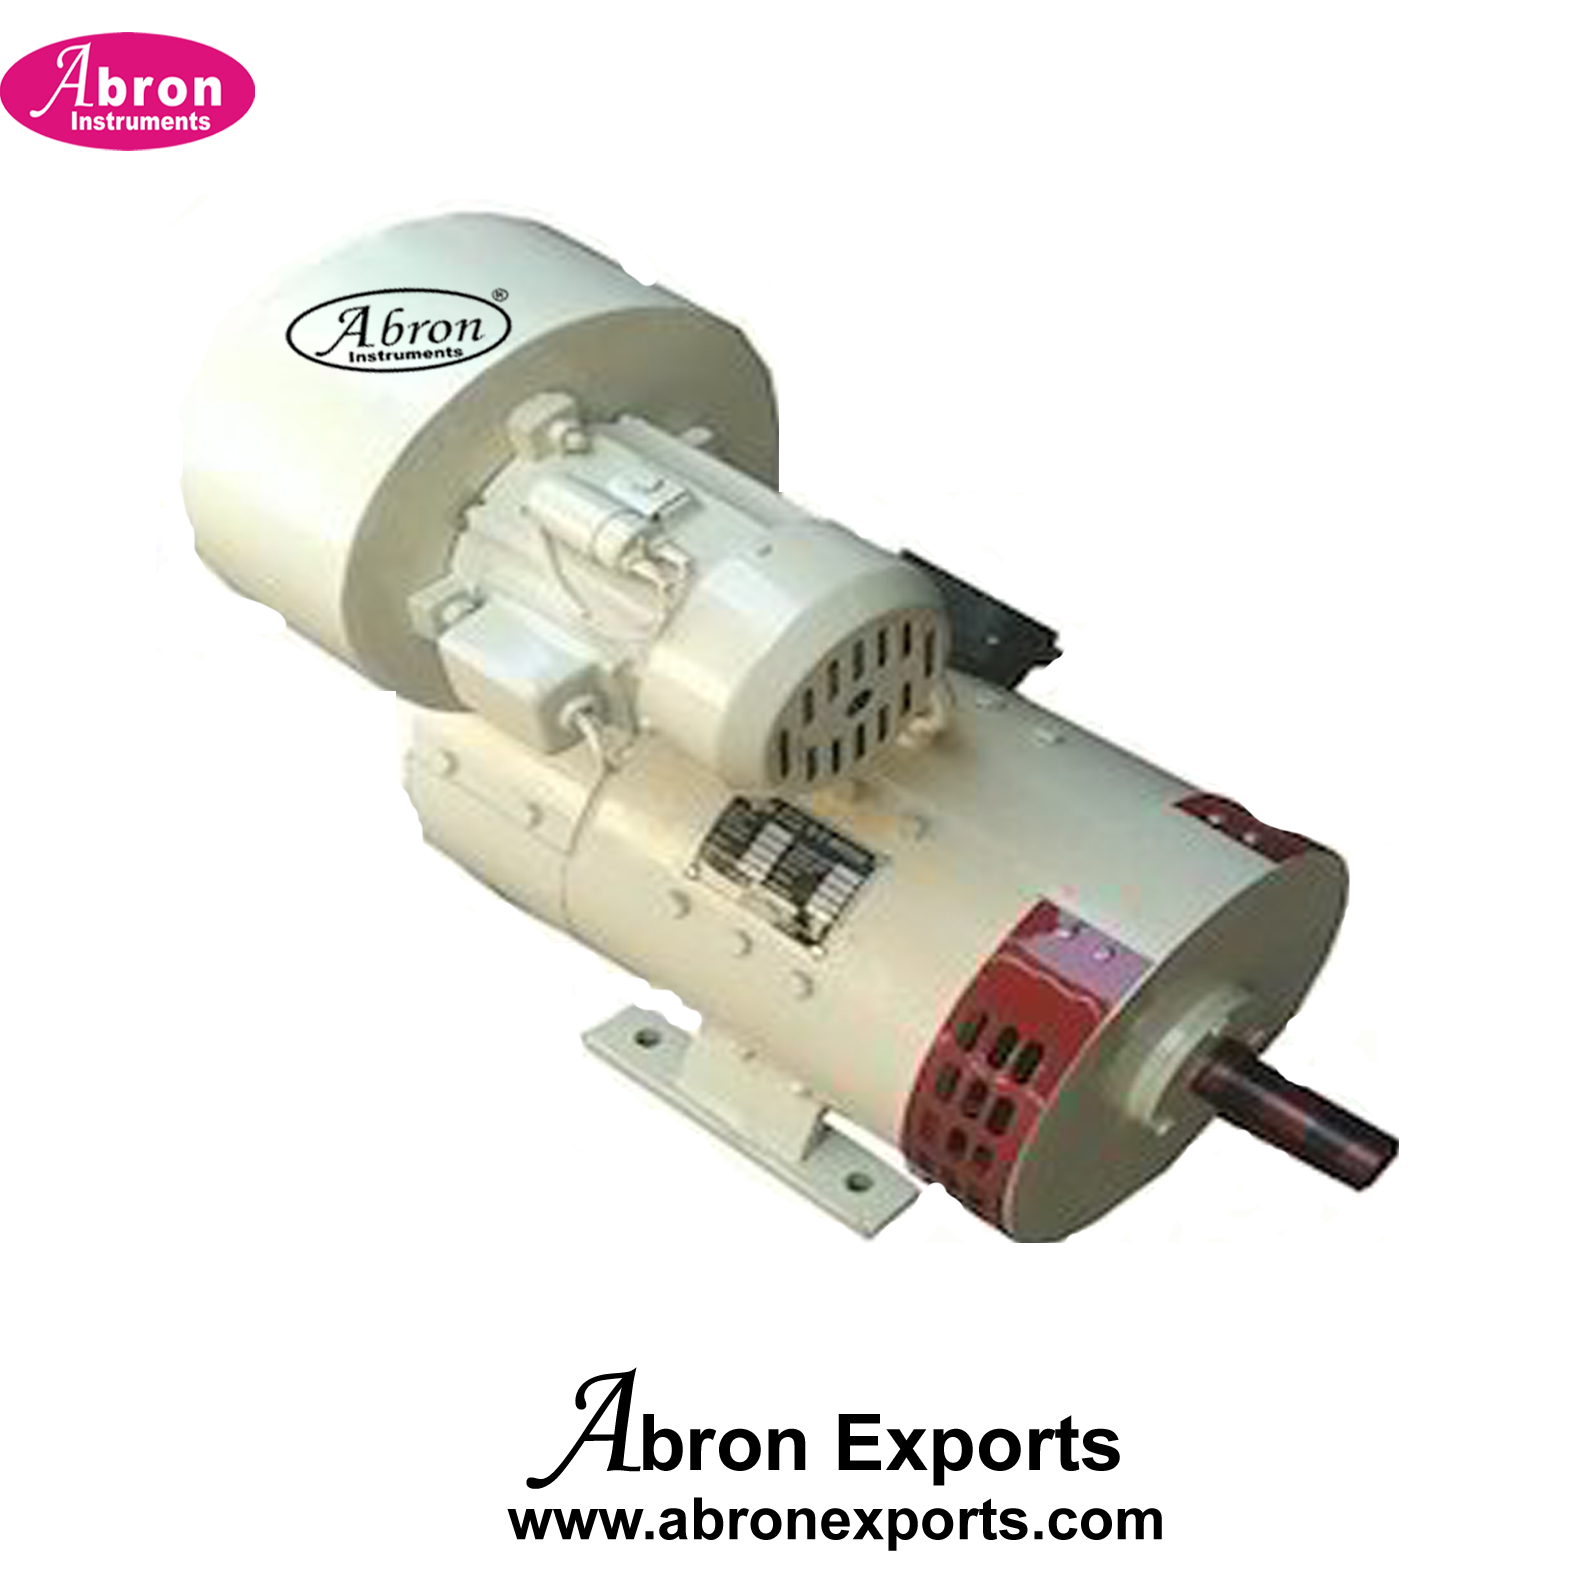 Motor DC series wound motors Abron AE-8464MSW 